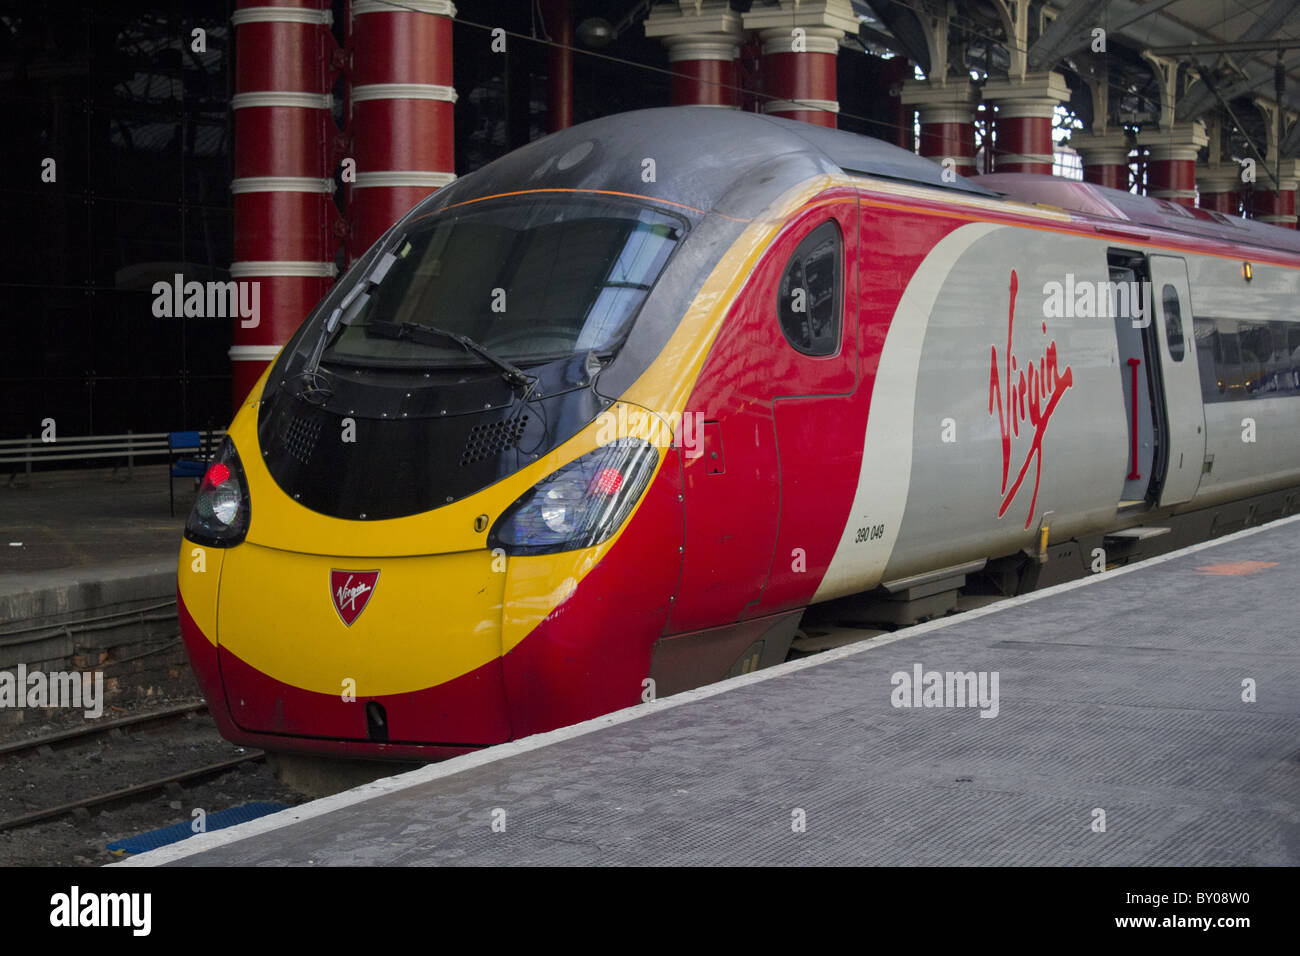 Virgin train at Liverpool Lime St Station Stock Photo